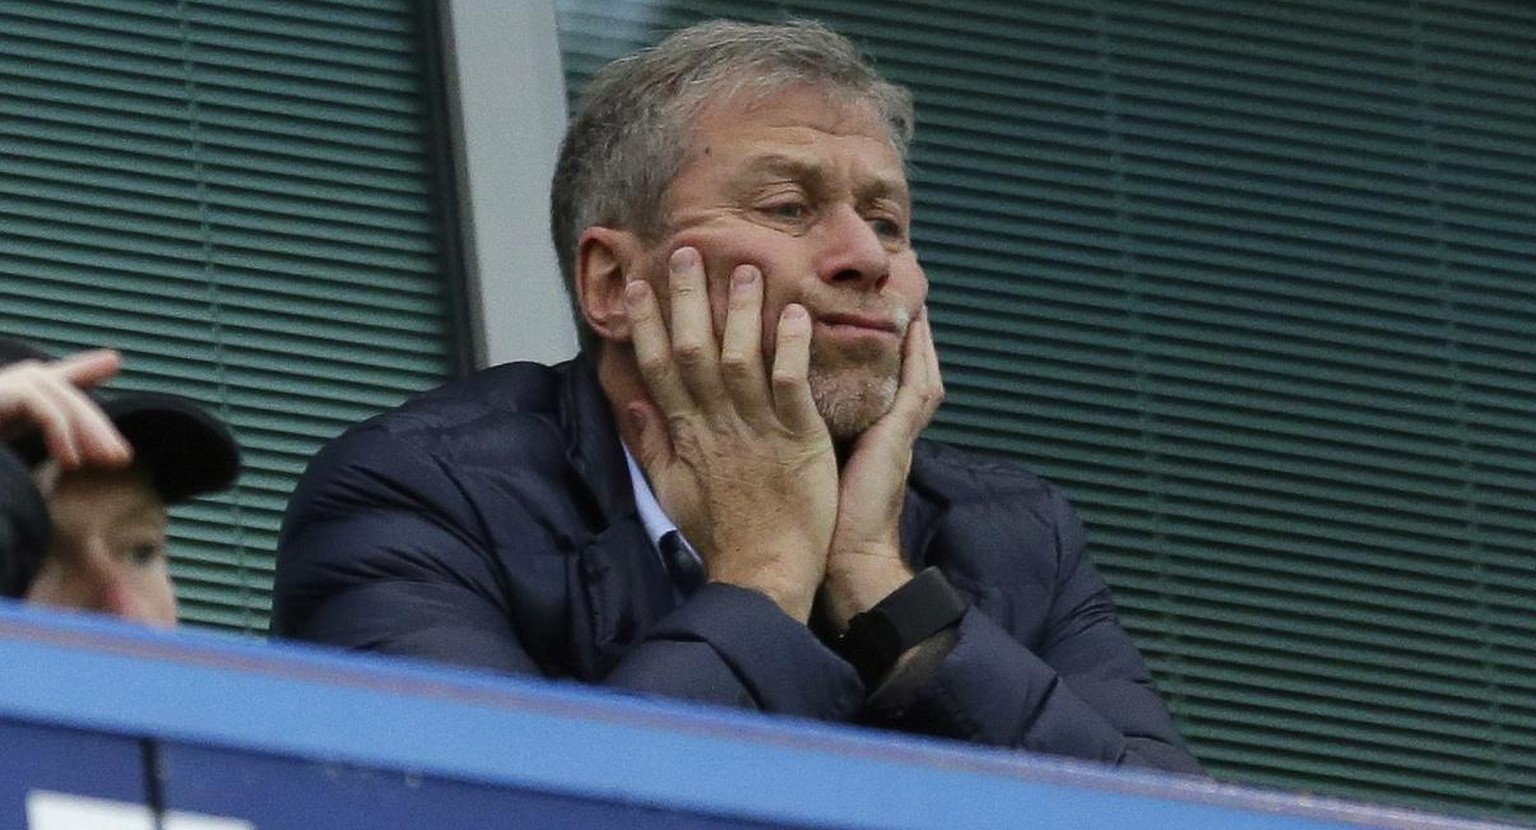 FILE - In this file photo dated Saturday, Dec. 19, 2015, Chelsea soccer club owner Roman Abramovich sits in his box before the English Premier League soccer match between Chelsea and Sunderland at Sta ...